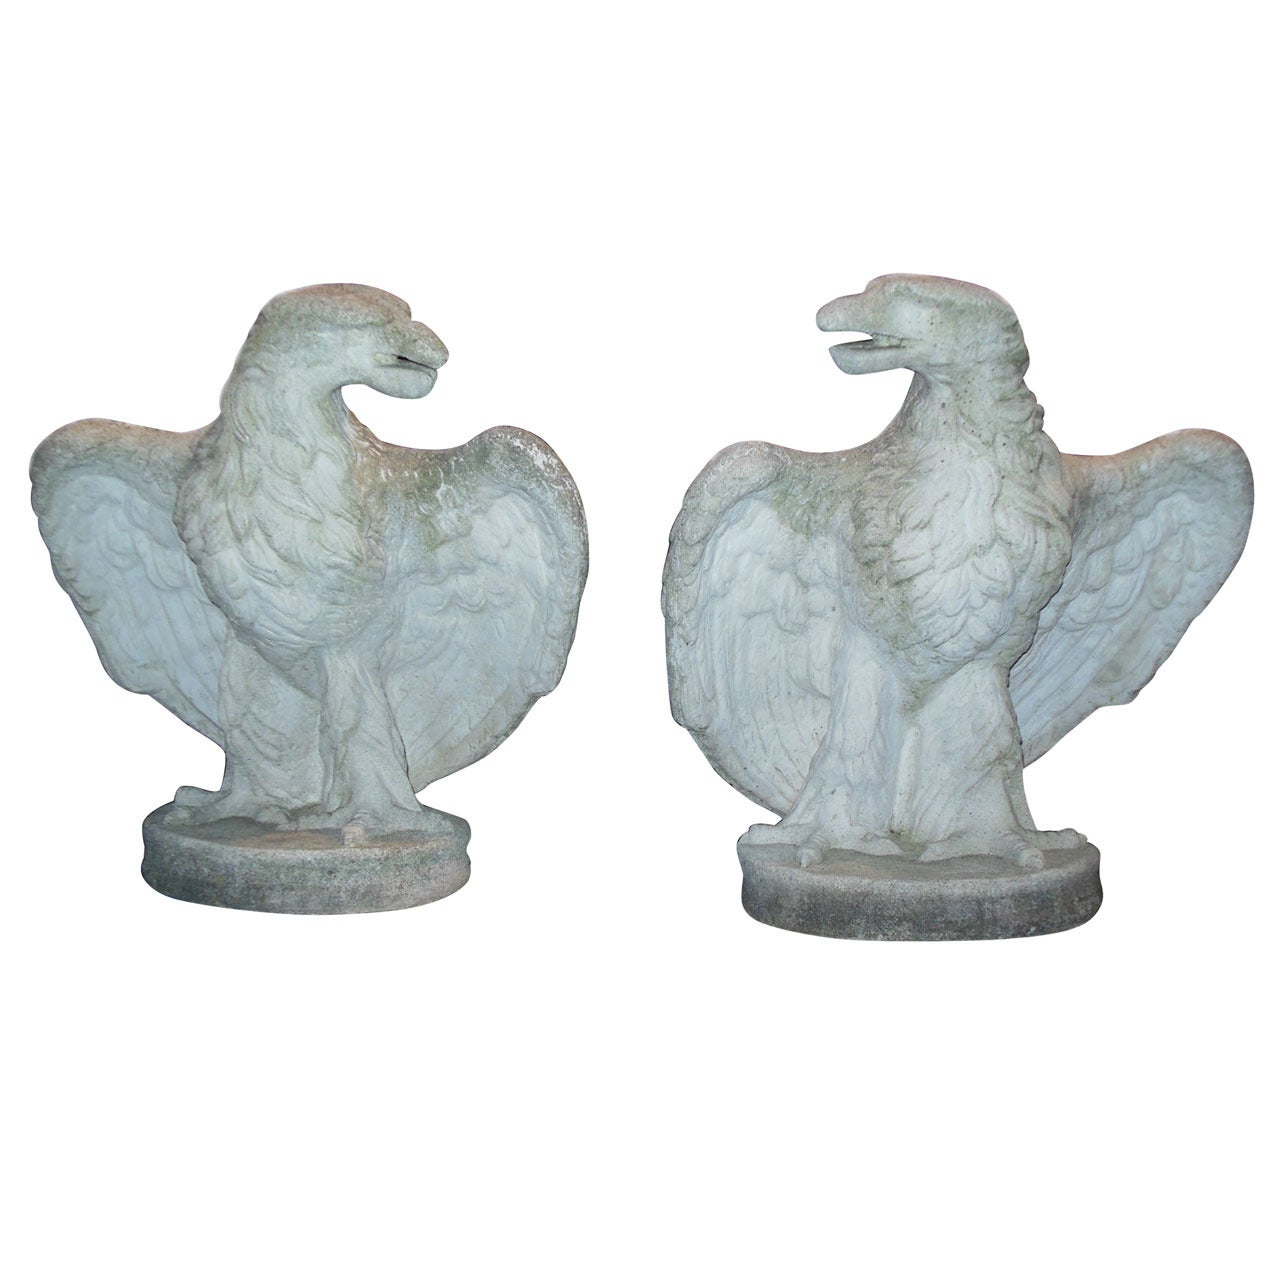  Eagles, pr of Cast Stone For Sale